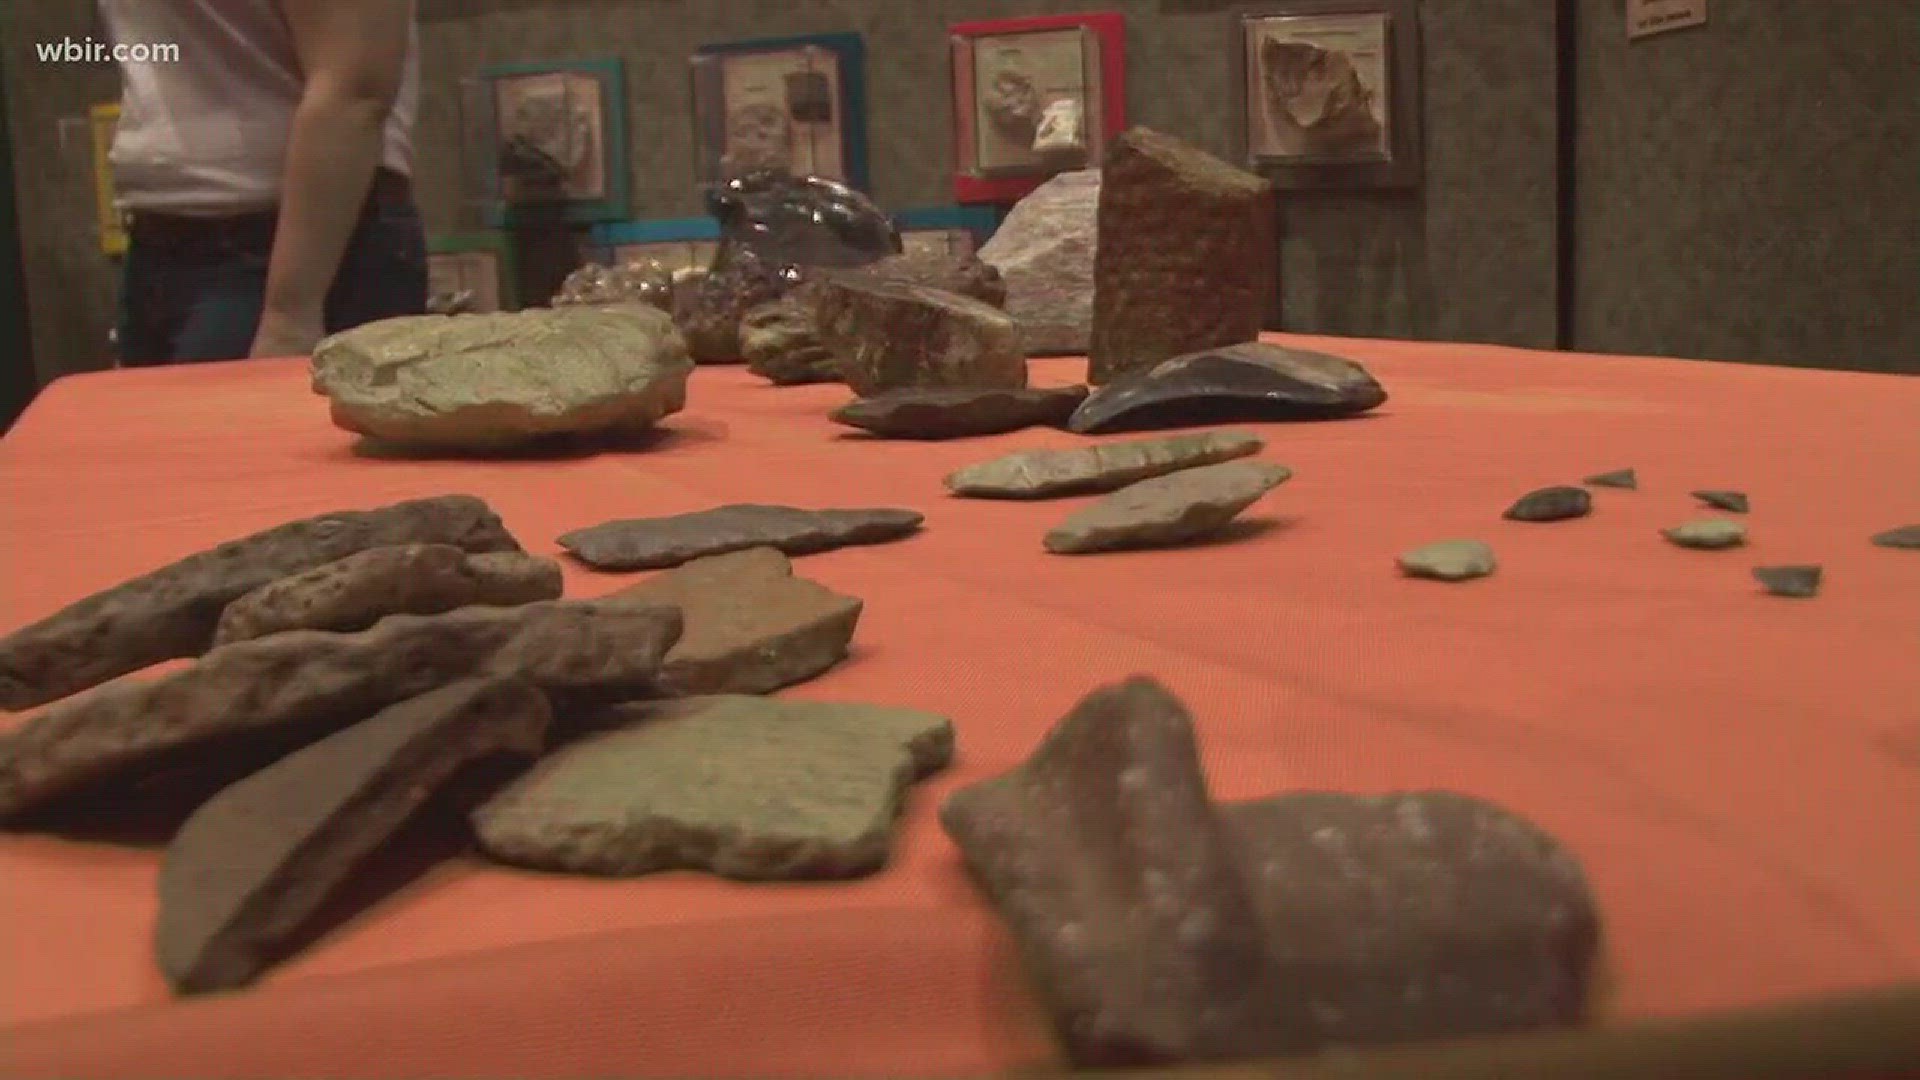 The museum will celebrate Archaeology Day on Sunday.